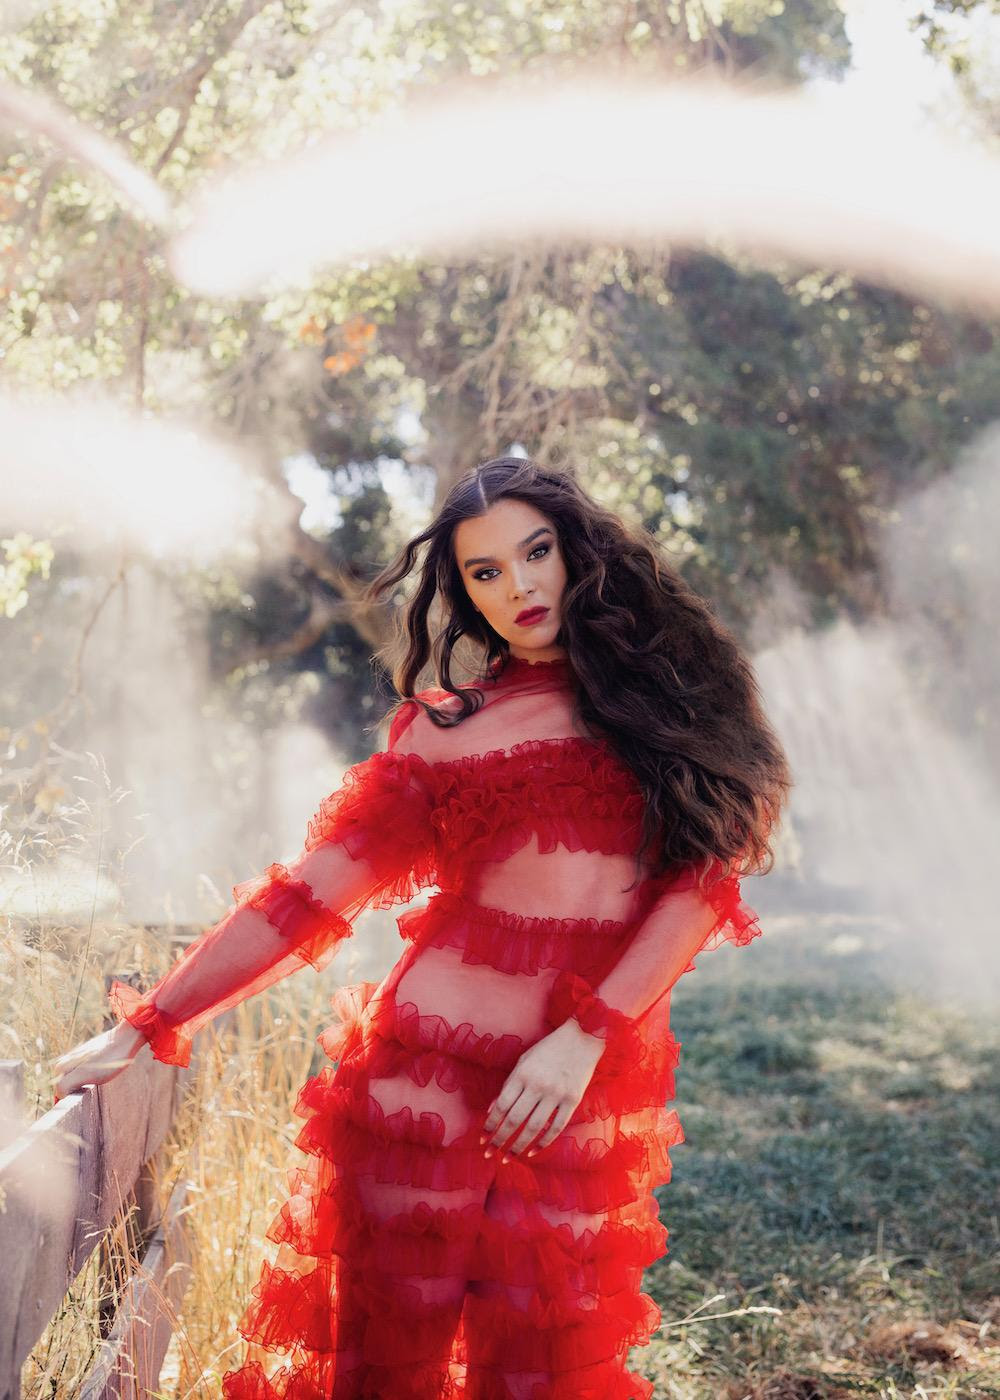 Hailee Steinfeld drops magical music video for "Afterlife"